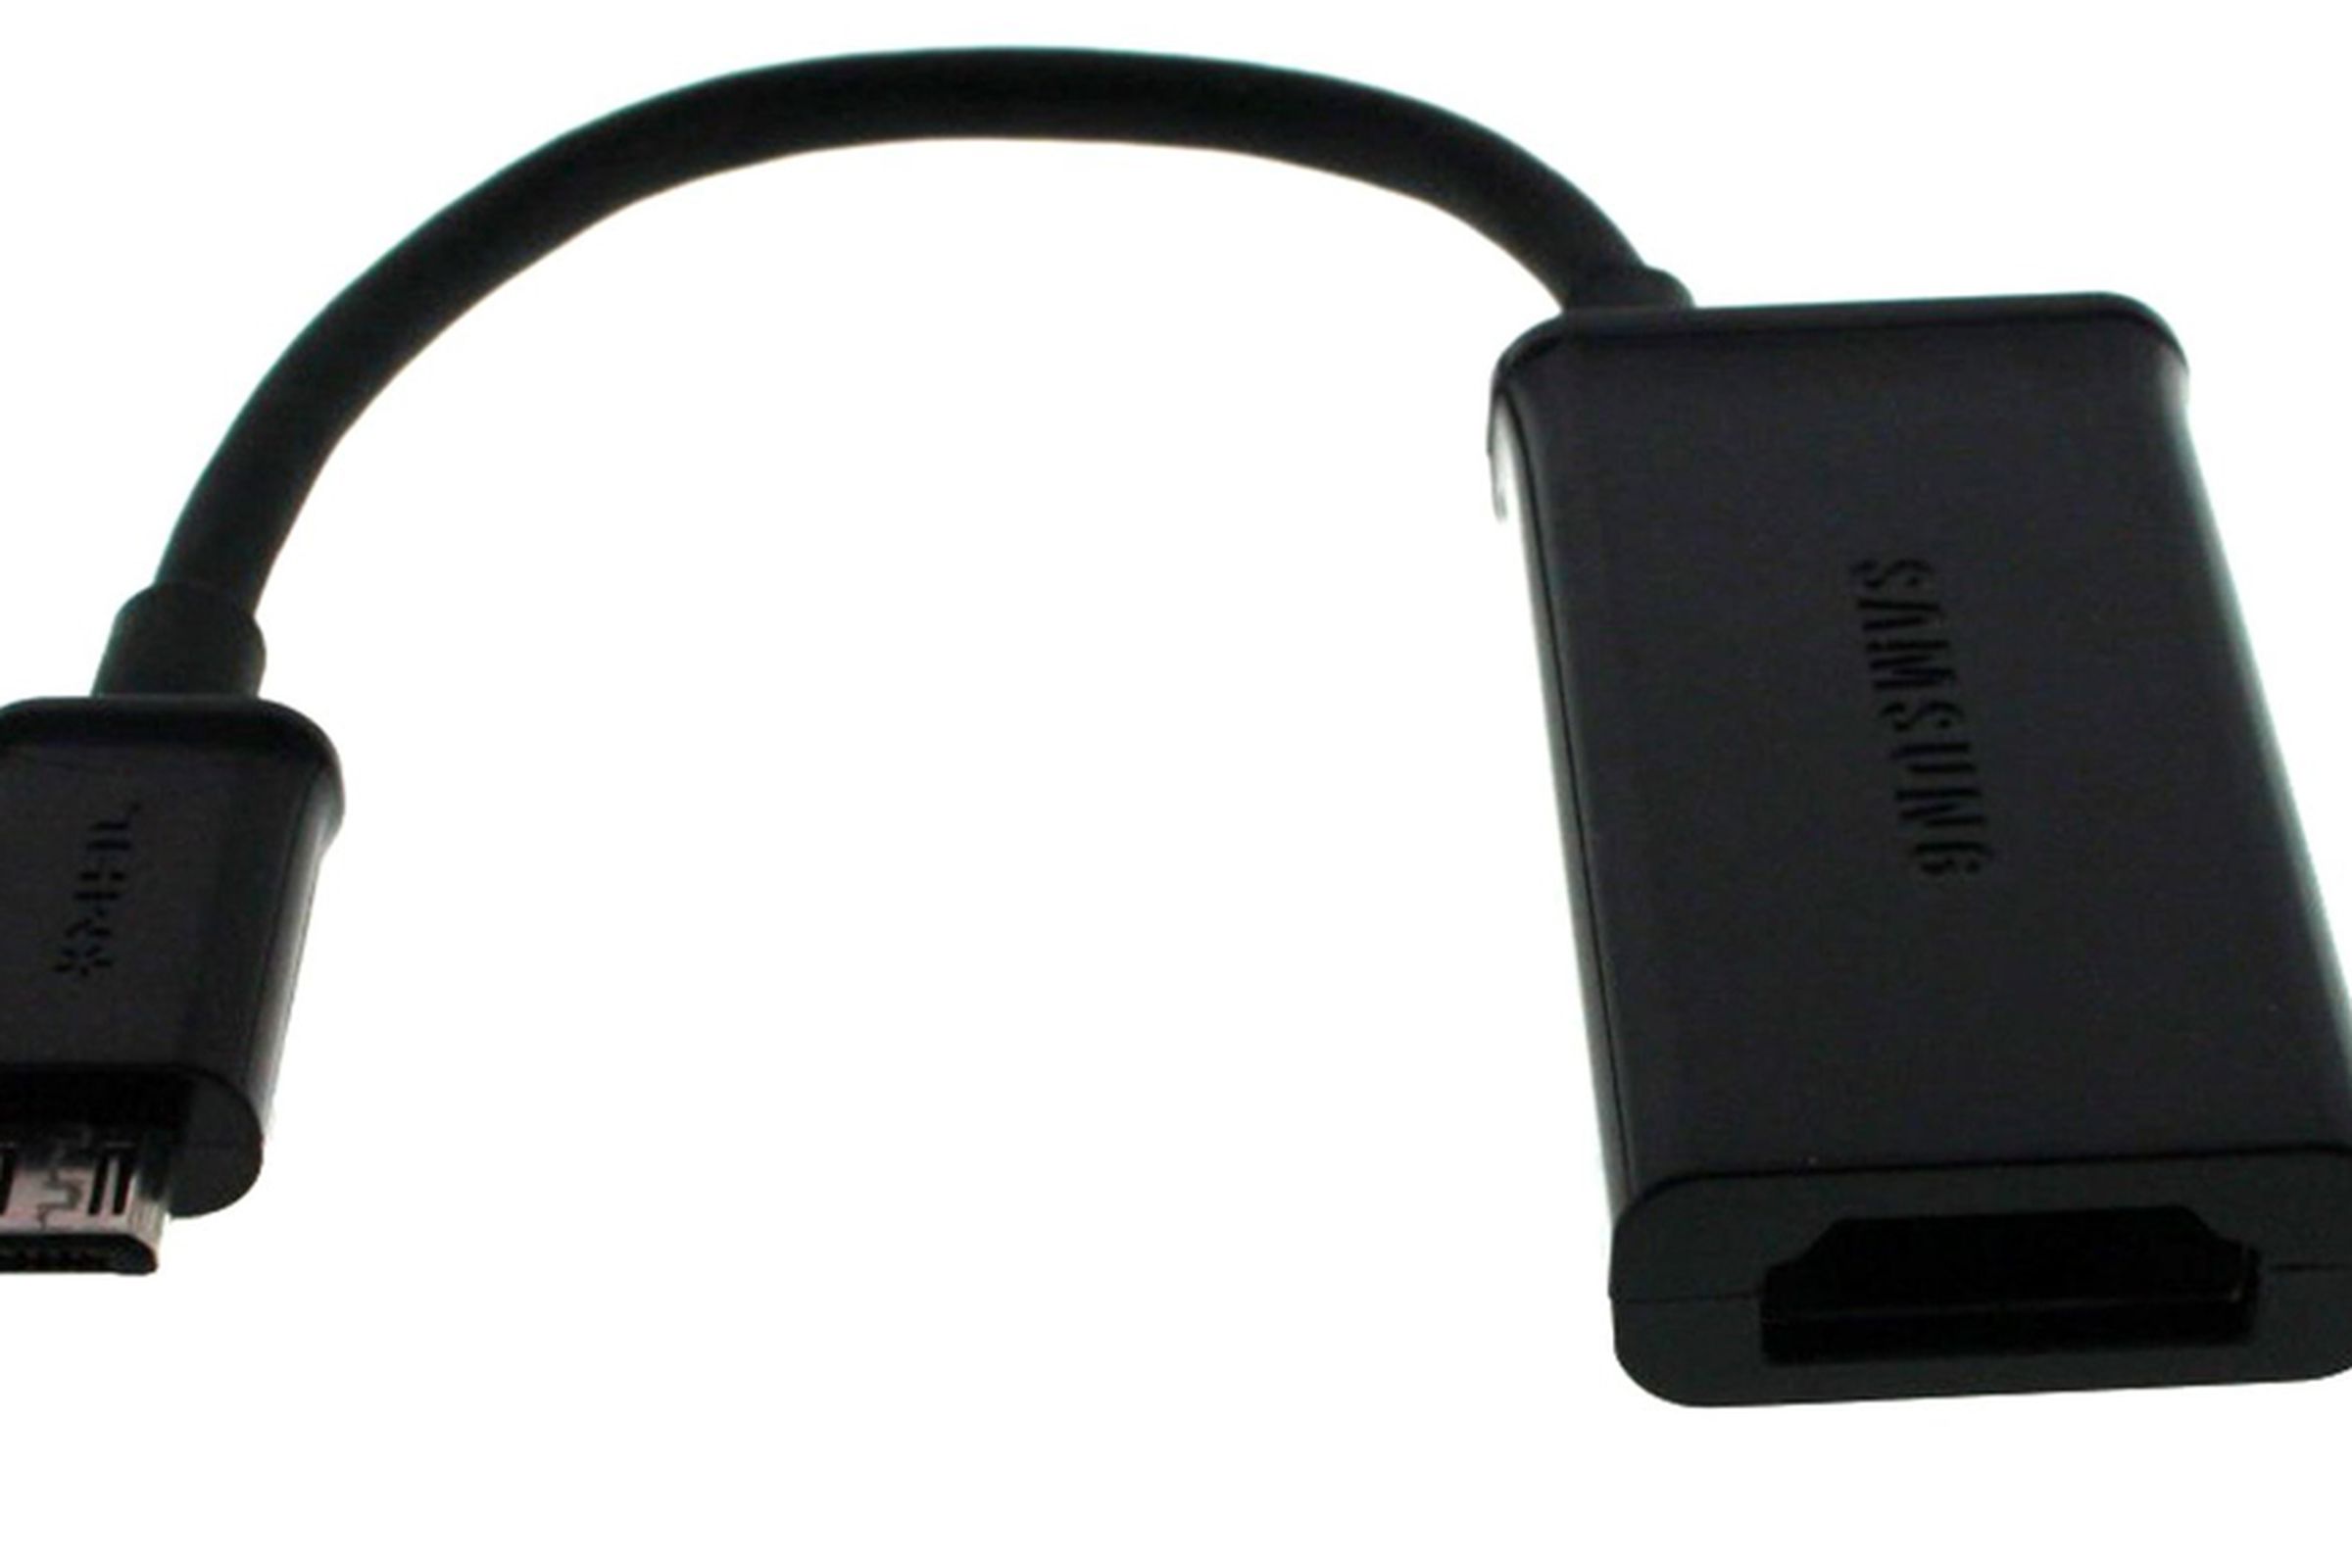 MHL adapter cropped